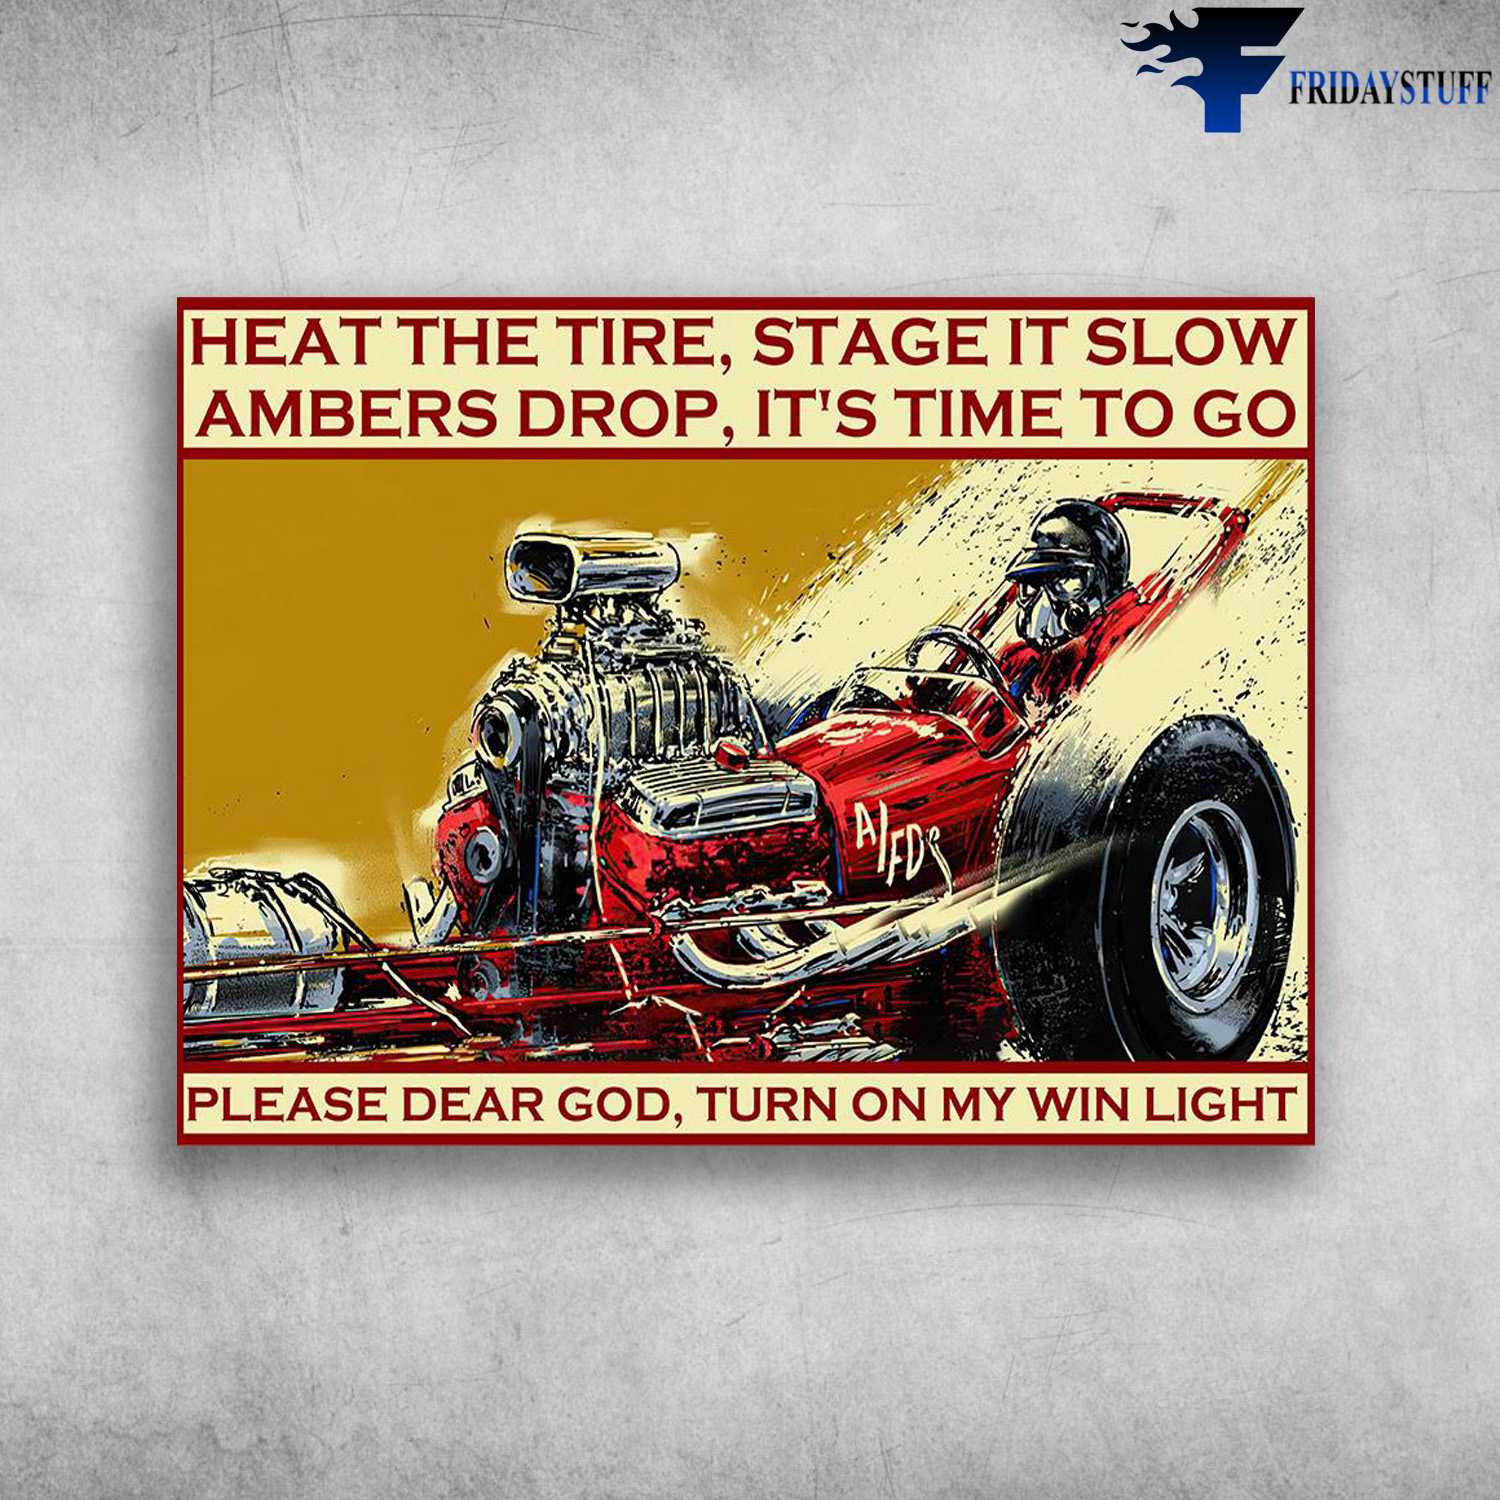 Formula One, Racing Poster - The Heat The Tire, Stage It Slow, Ambers Drop, It's Time To Go, Pleasr Dear God, Turn On My Win Light